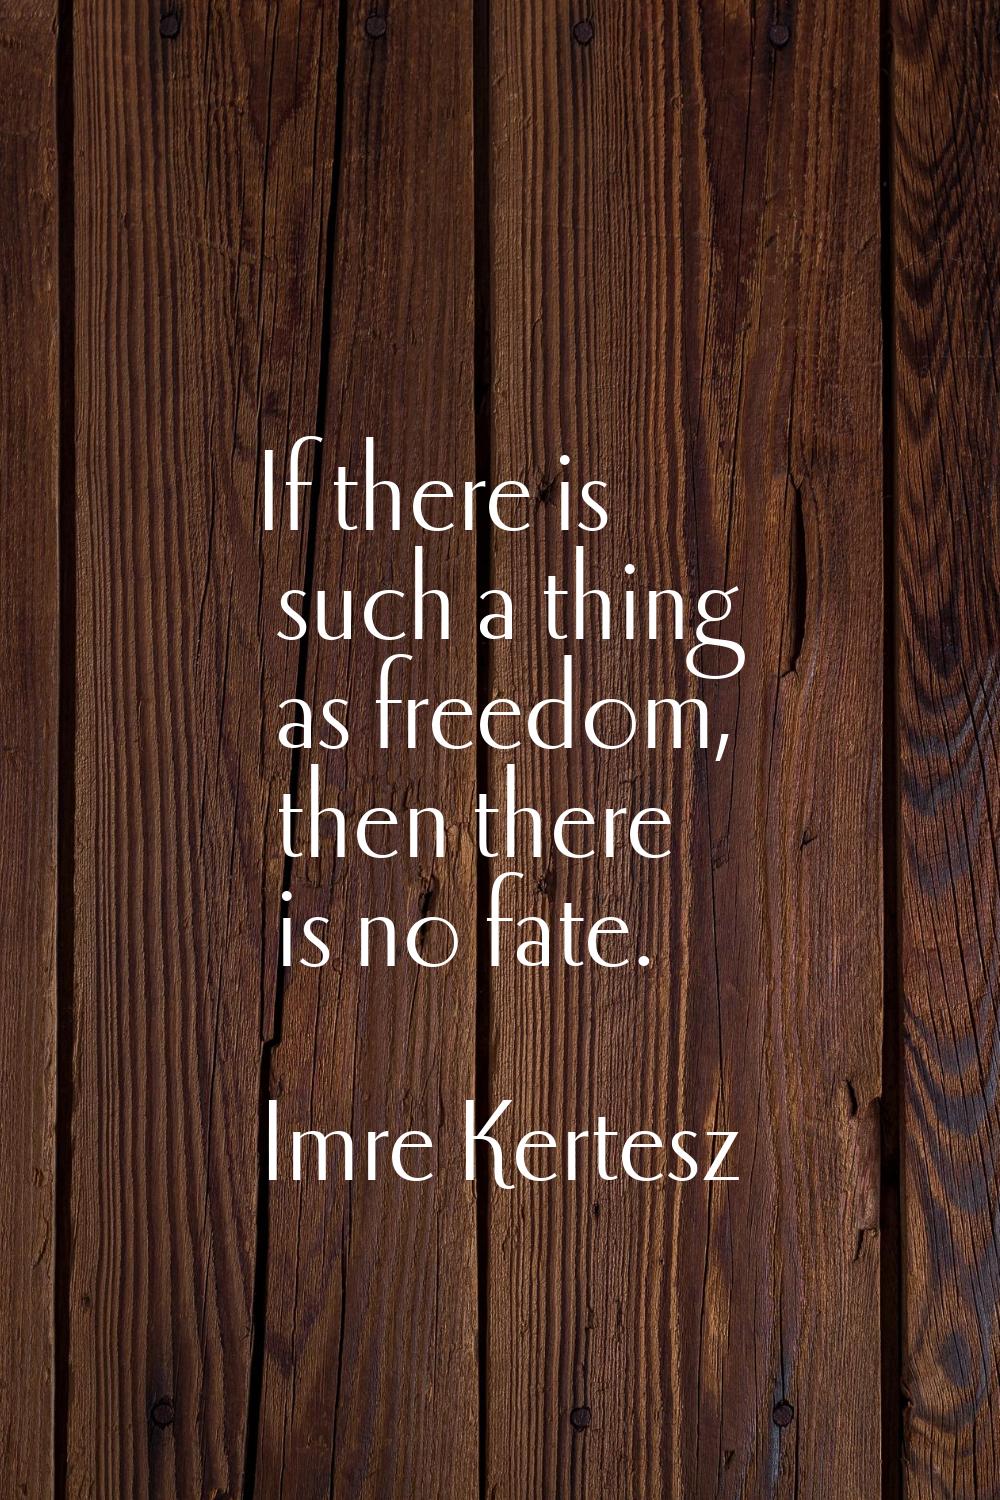 If there is such a thing as freedom, then there is no fate.